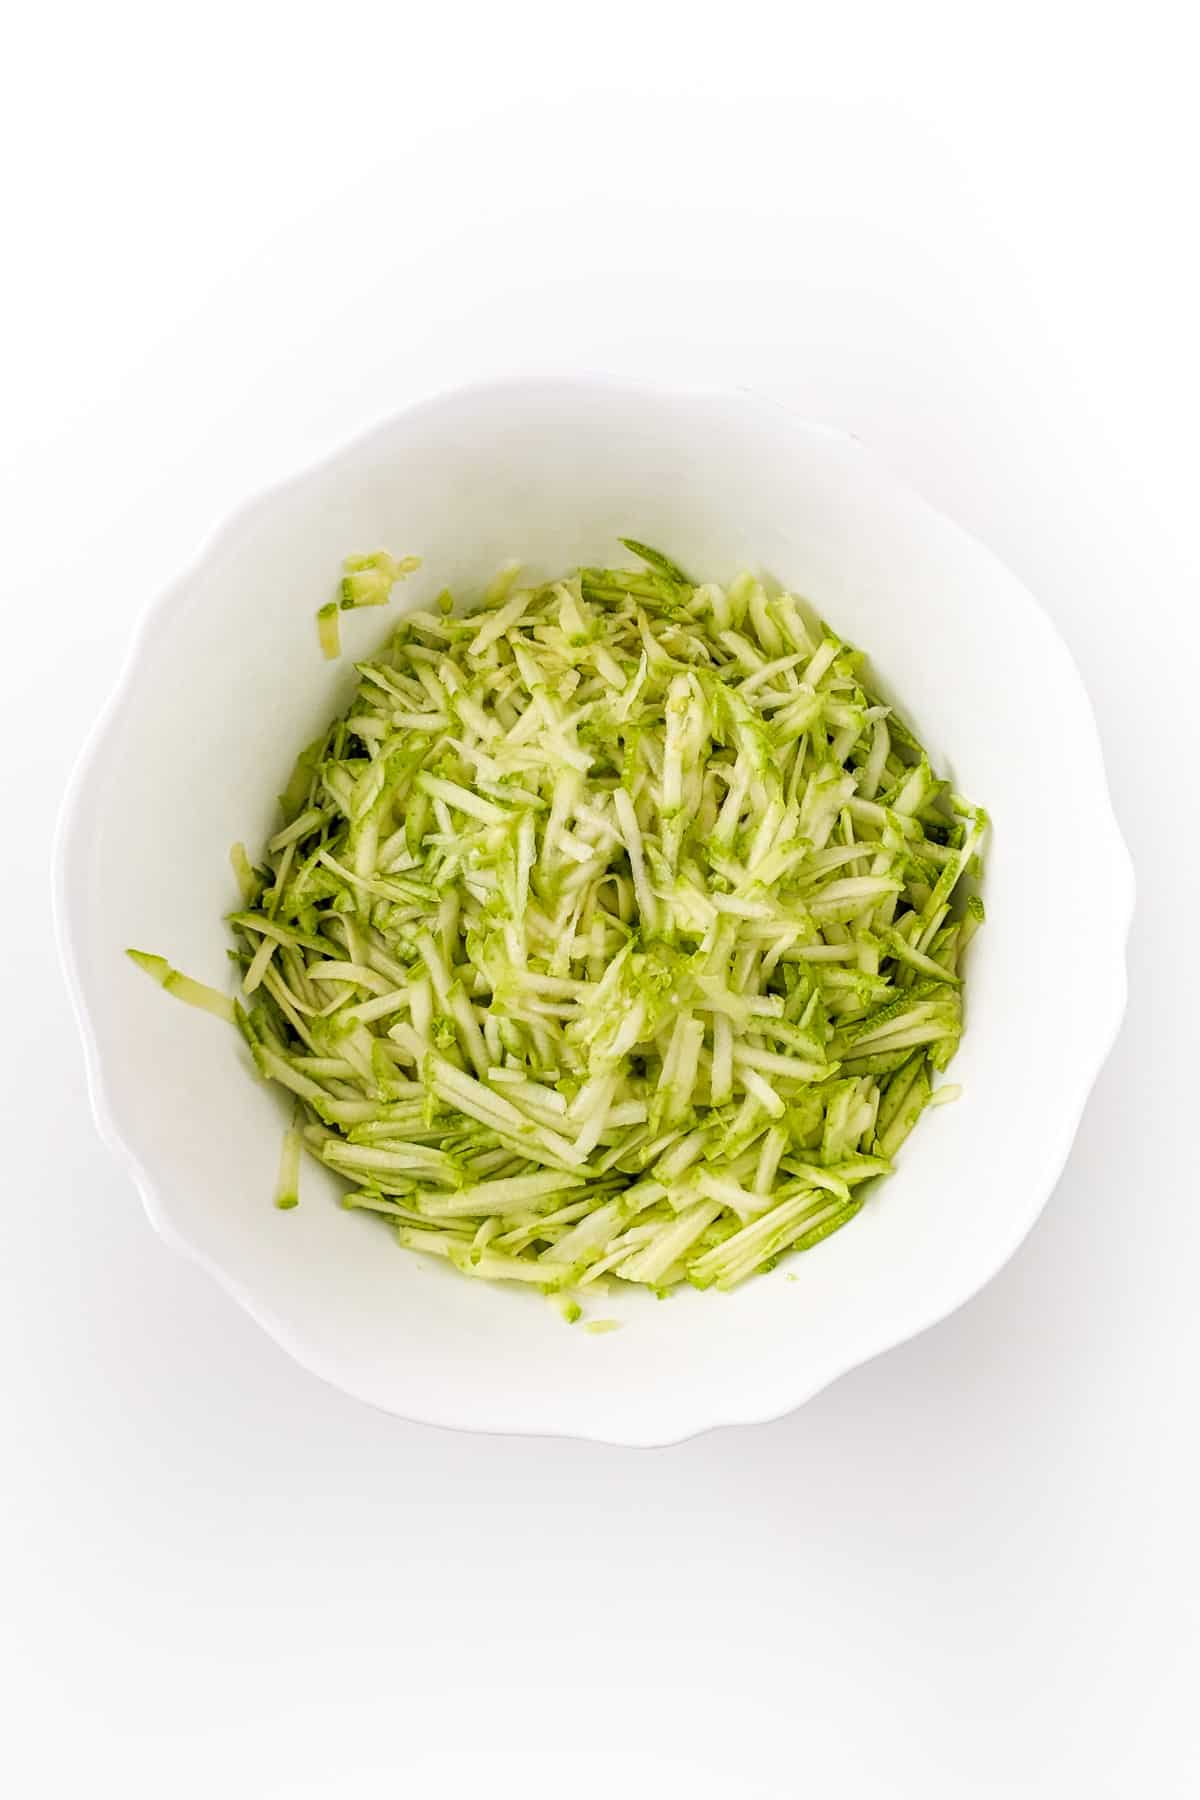 White deep bowl with shredded zucchini on a white background.